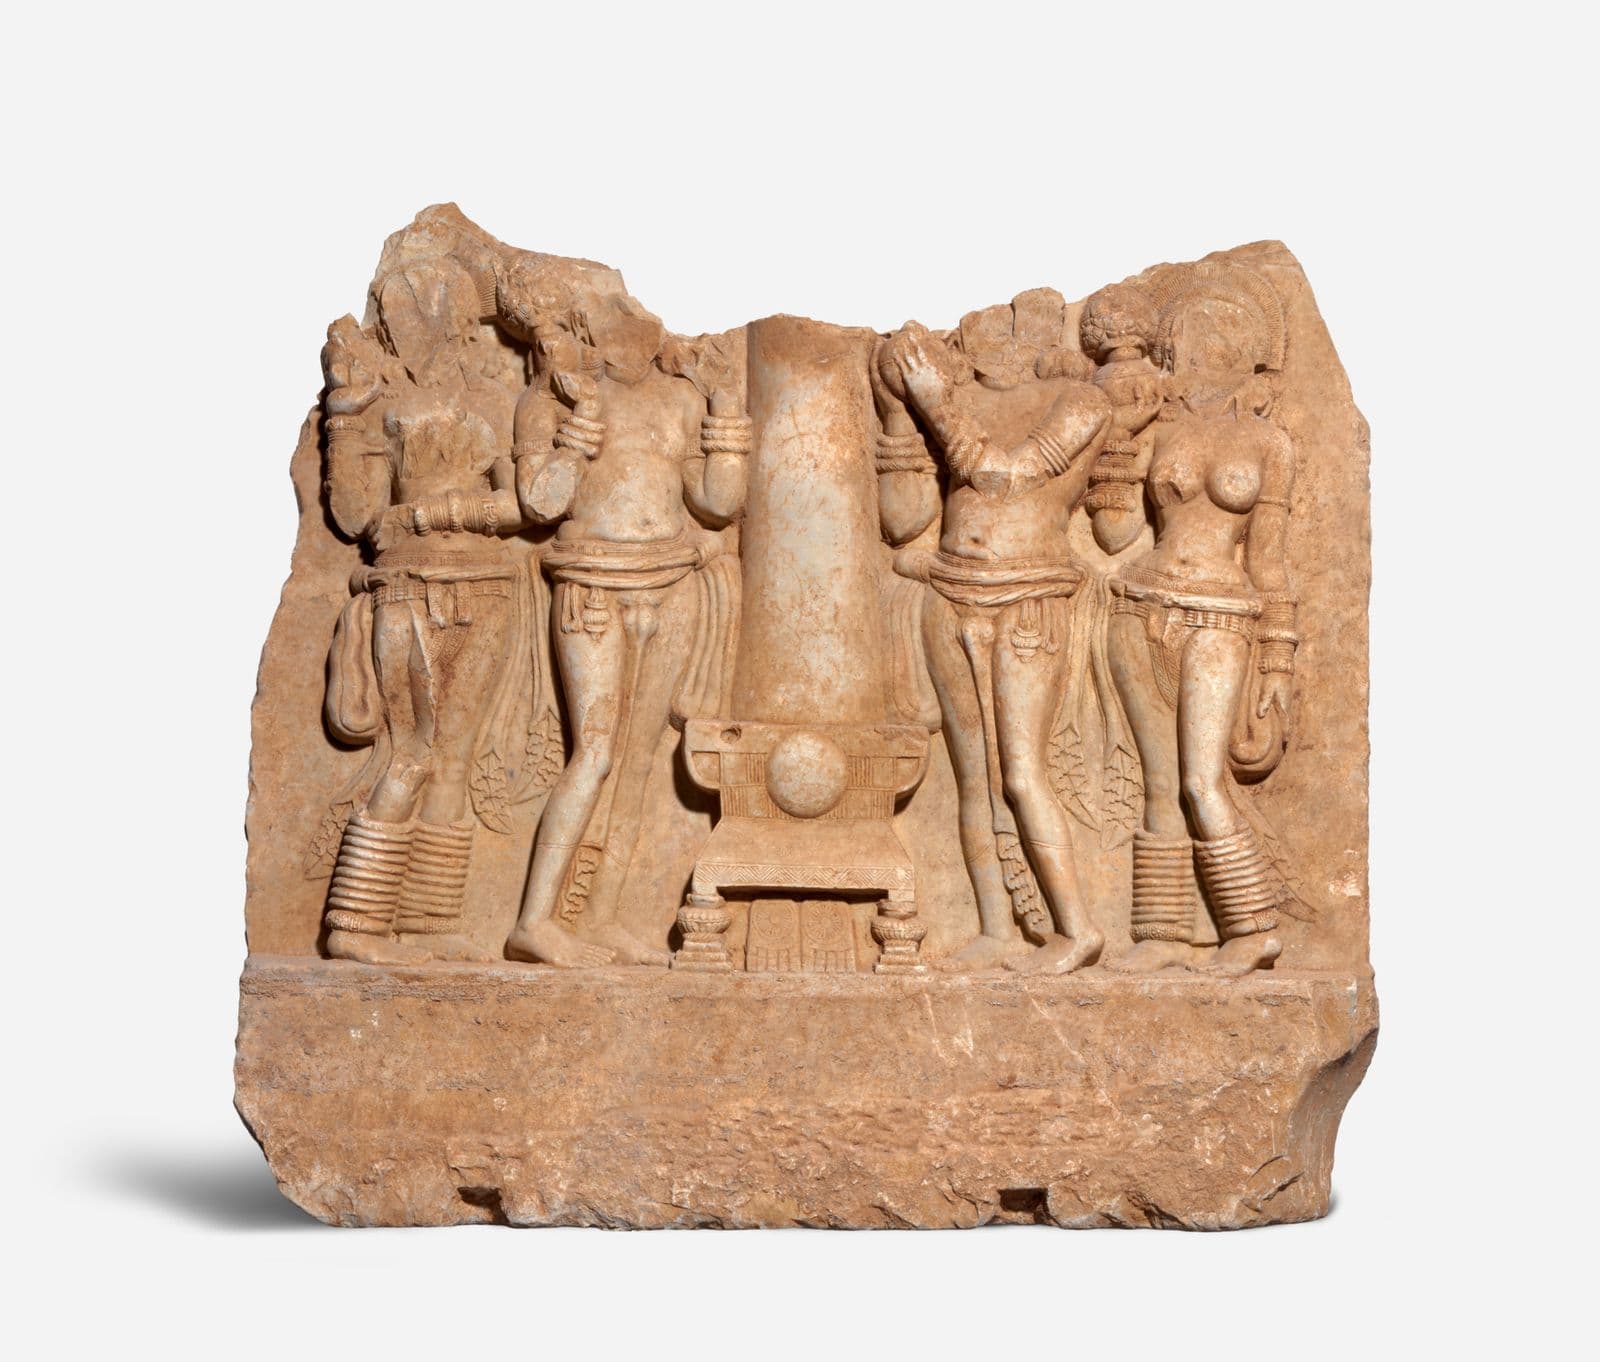 A limestone carved sculptured of people worshipping a diety